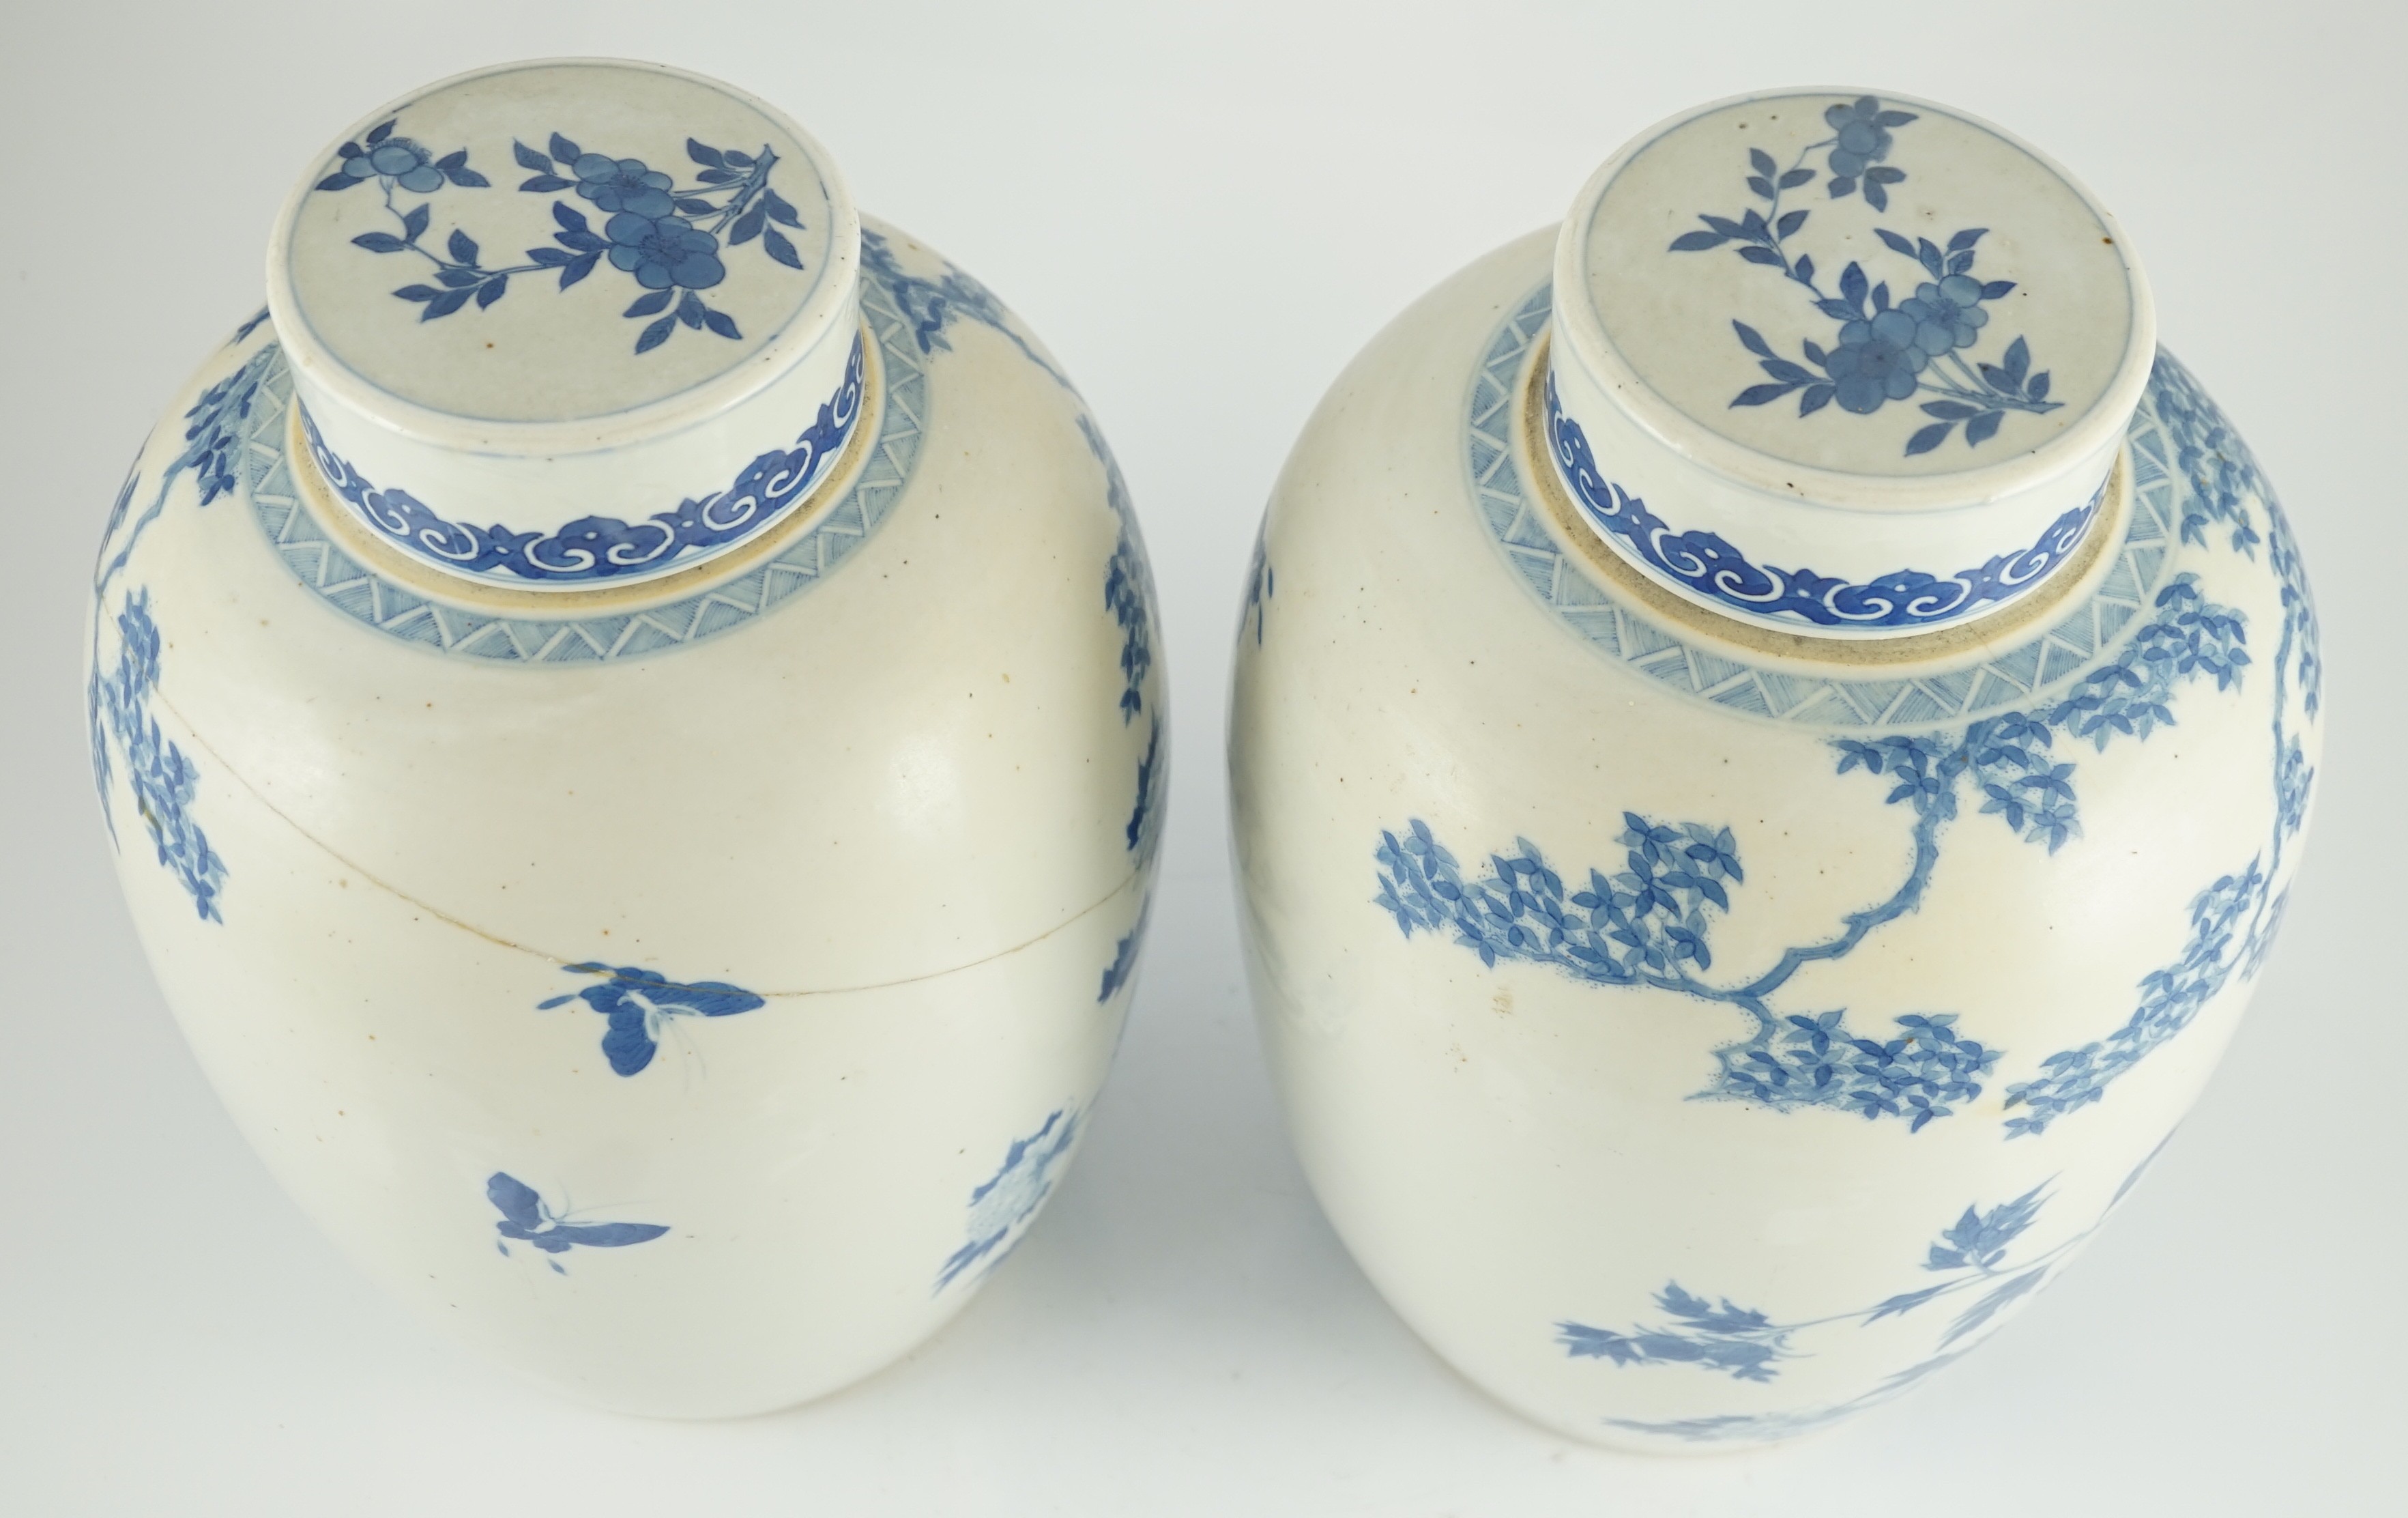 A pair of large Chinese blue and white ovoid jars and associated covers, 19th century, each - Image 5 of 13